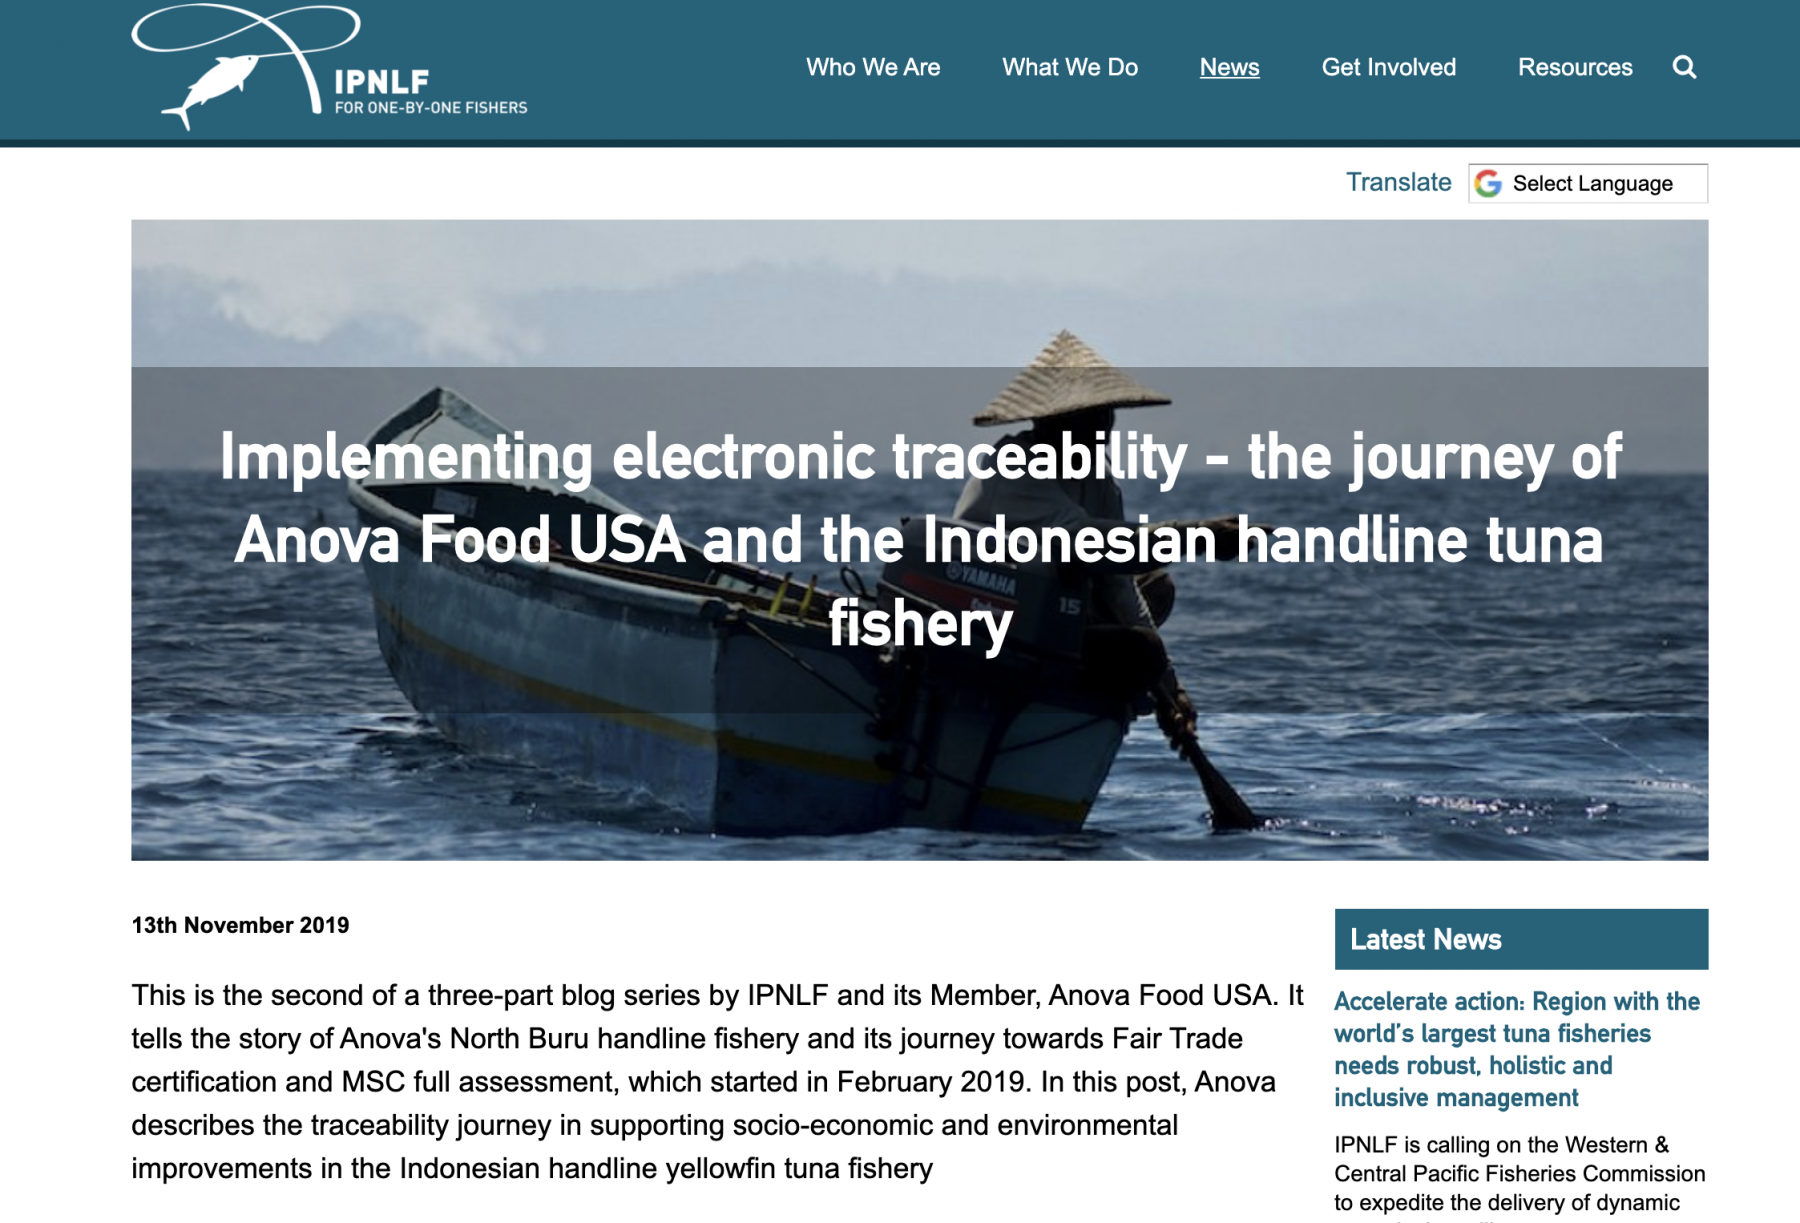 The journey of implementing electronic traceability and blockchain technology in the Indonesian handline tuna fishery